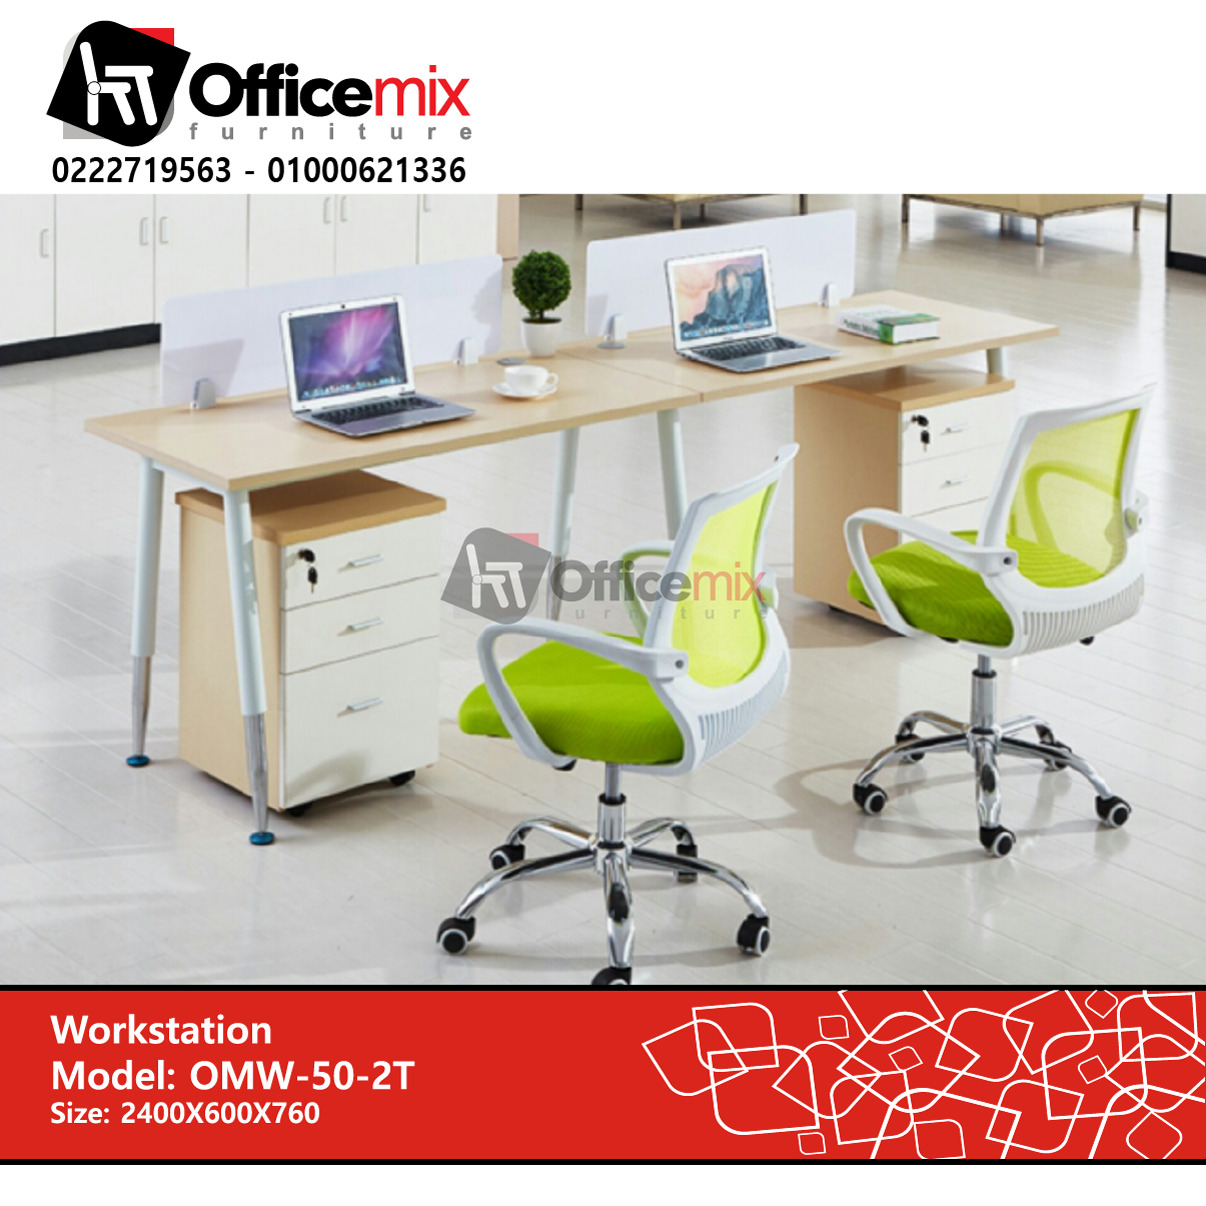 Office mix Workstation OMW-50-2T